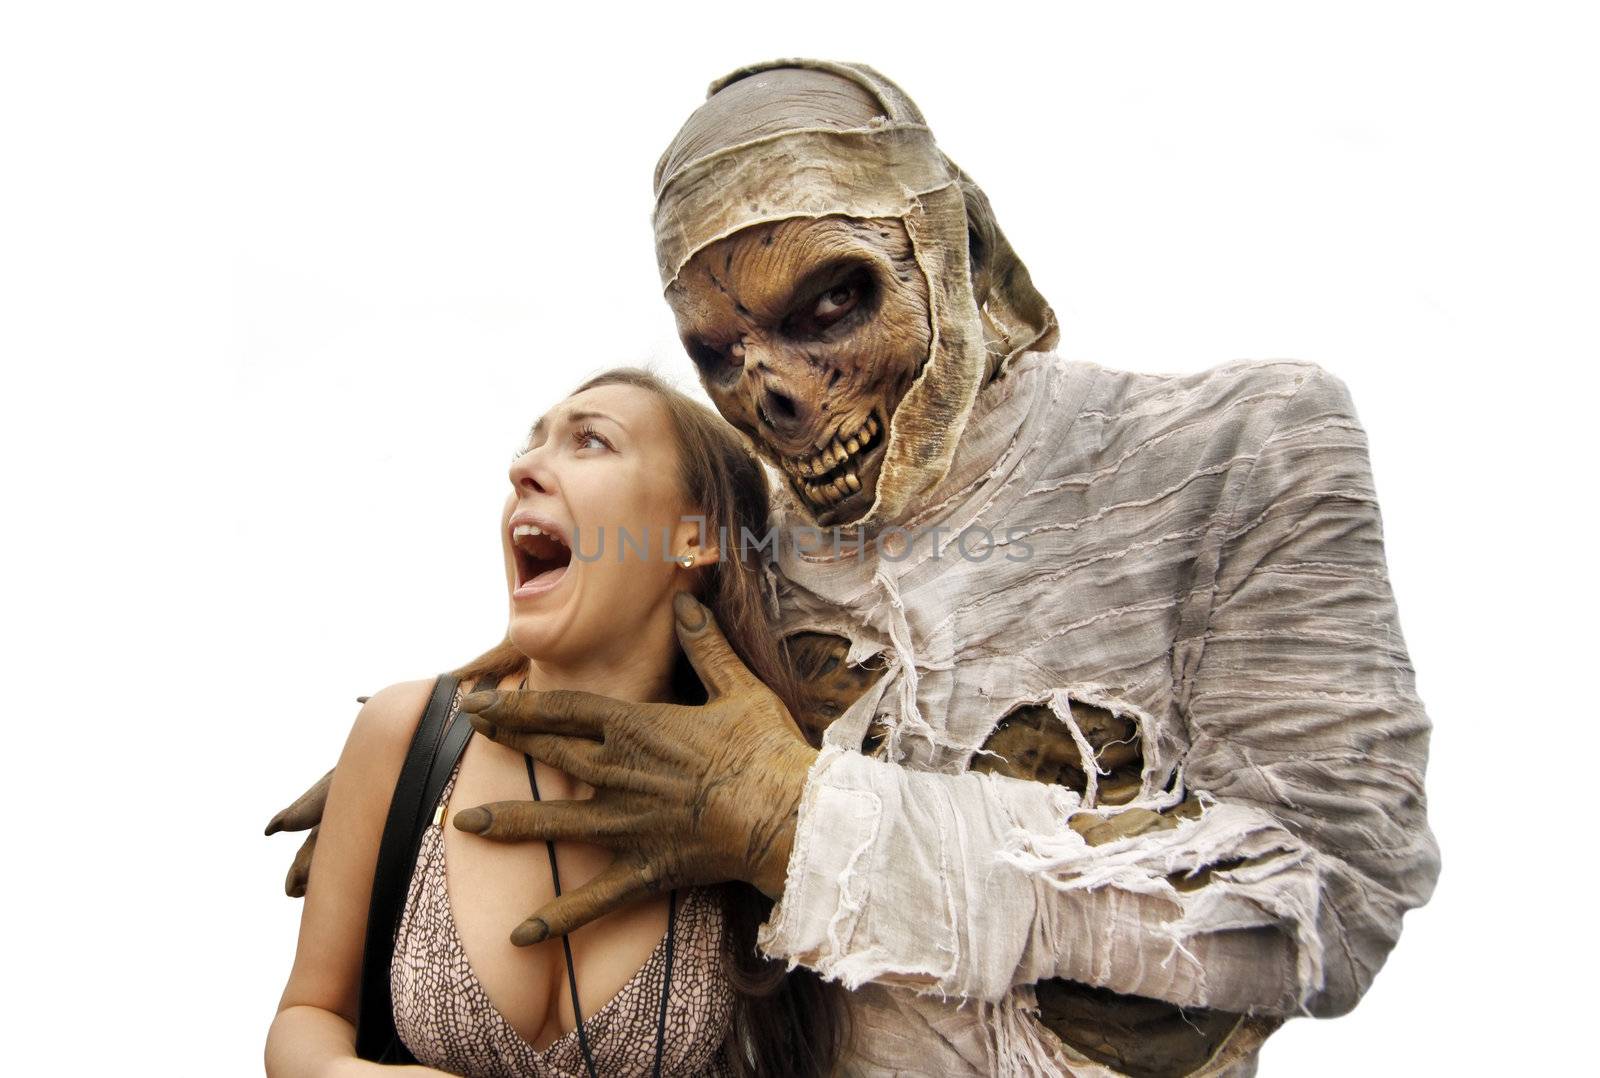 Mummies bandaged and decomposing hand grabs the young woman. The girl lets out a dramatic scream with a surprised startled look. White background